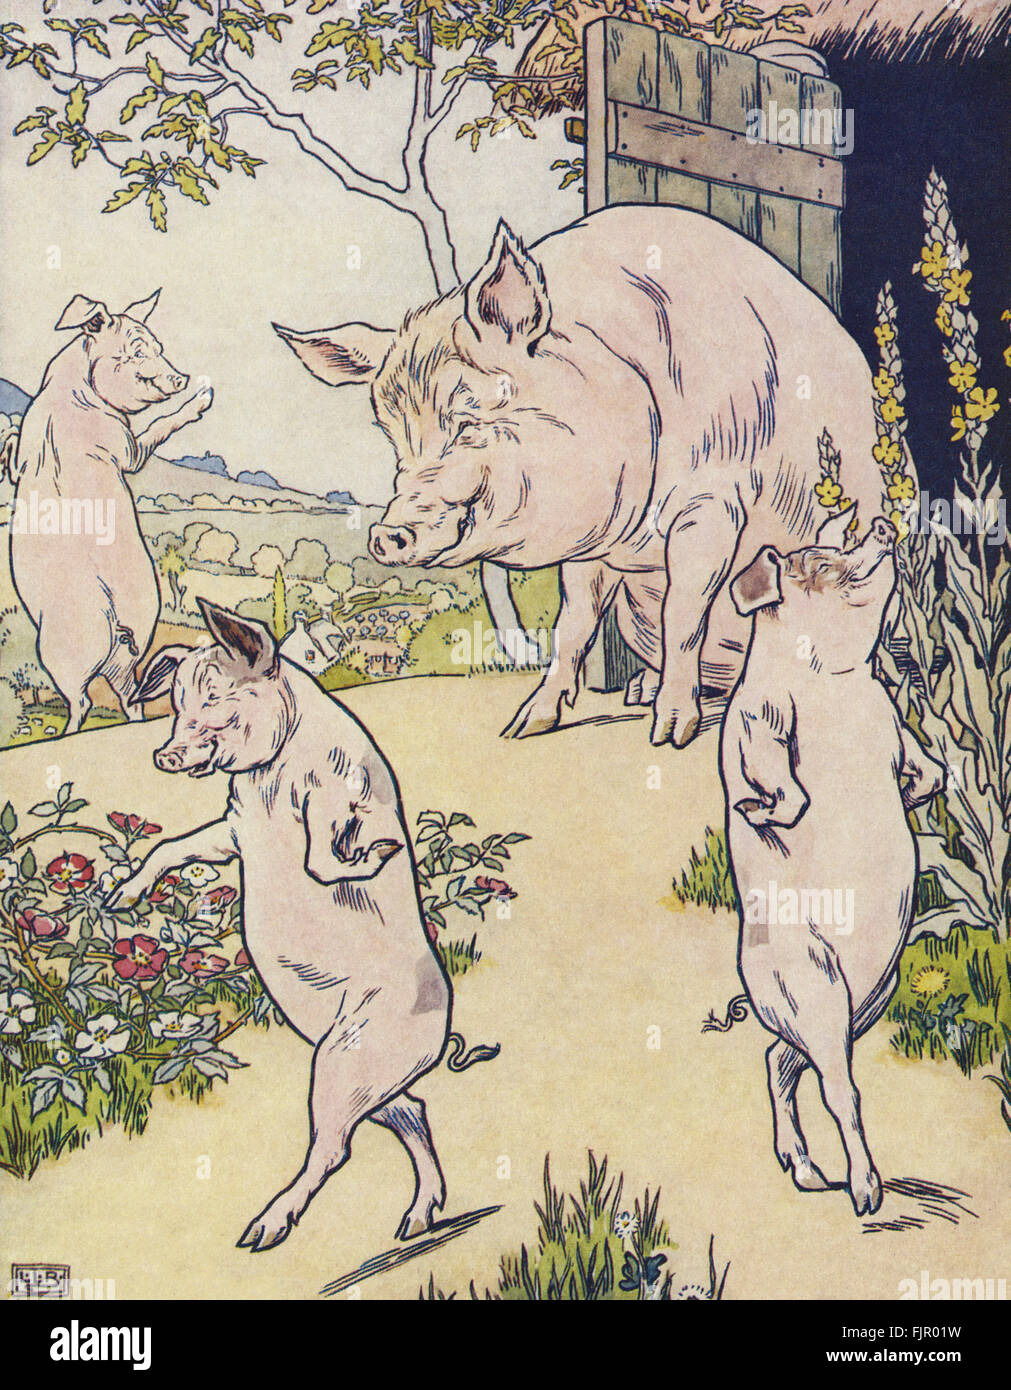 The Three Little Pigs, the old sow sends the three pigs to seek their fortune, from The Golden Goose Book, 1905, illustrated by Leonard Leslie Brooke (1862 - 1940) Stock Photo